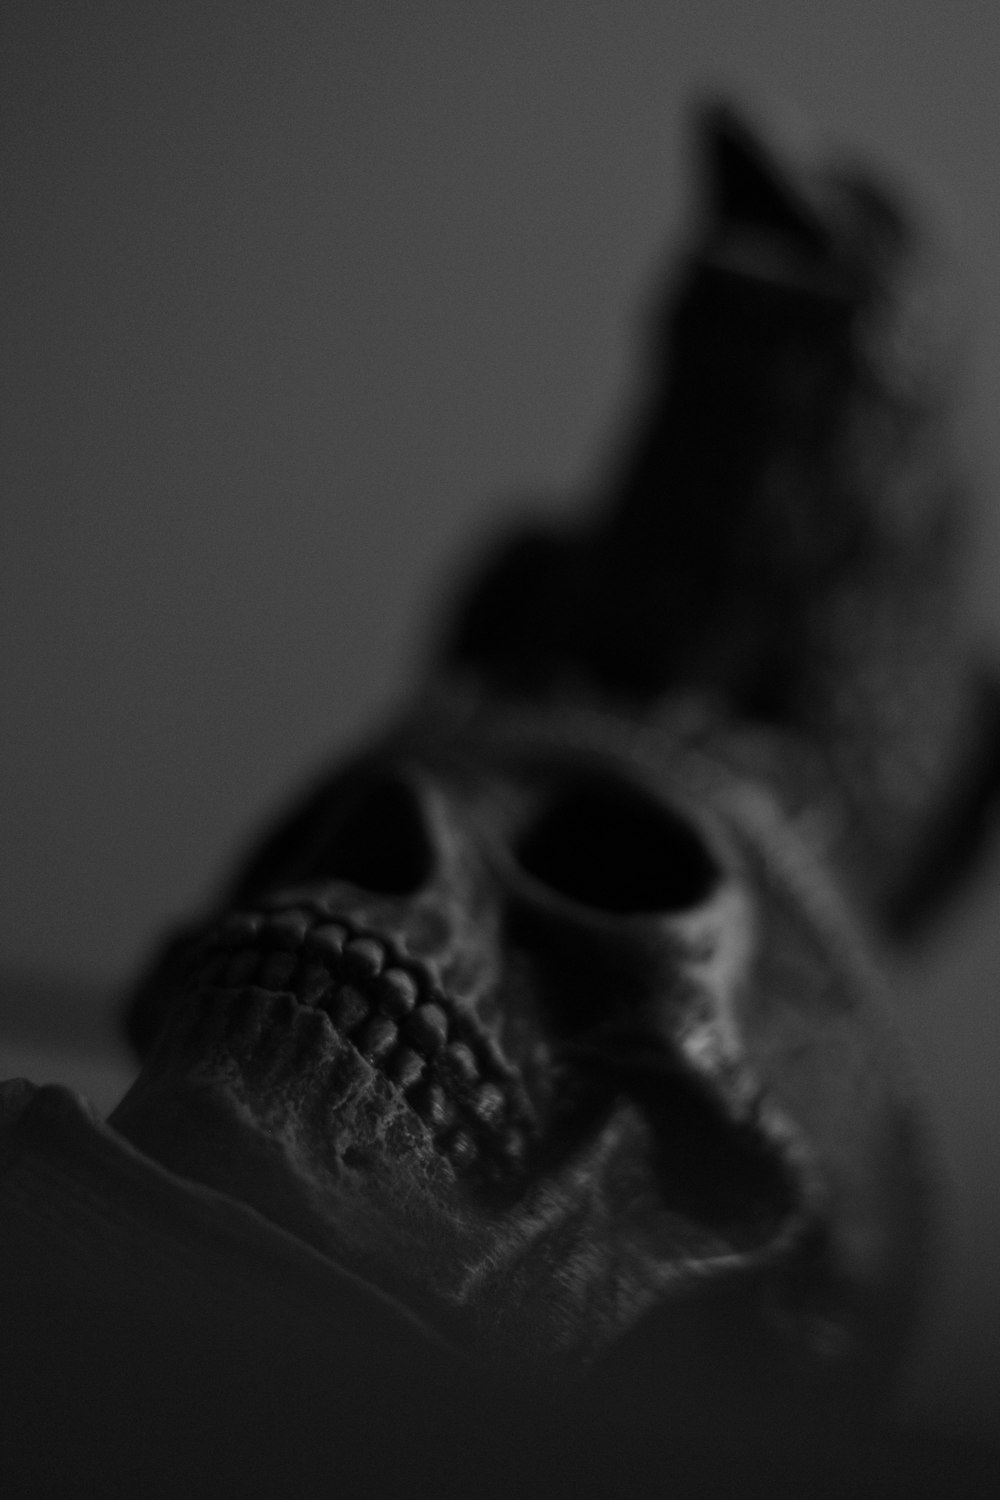 a black and white photo of a skull wearing a hat